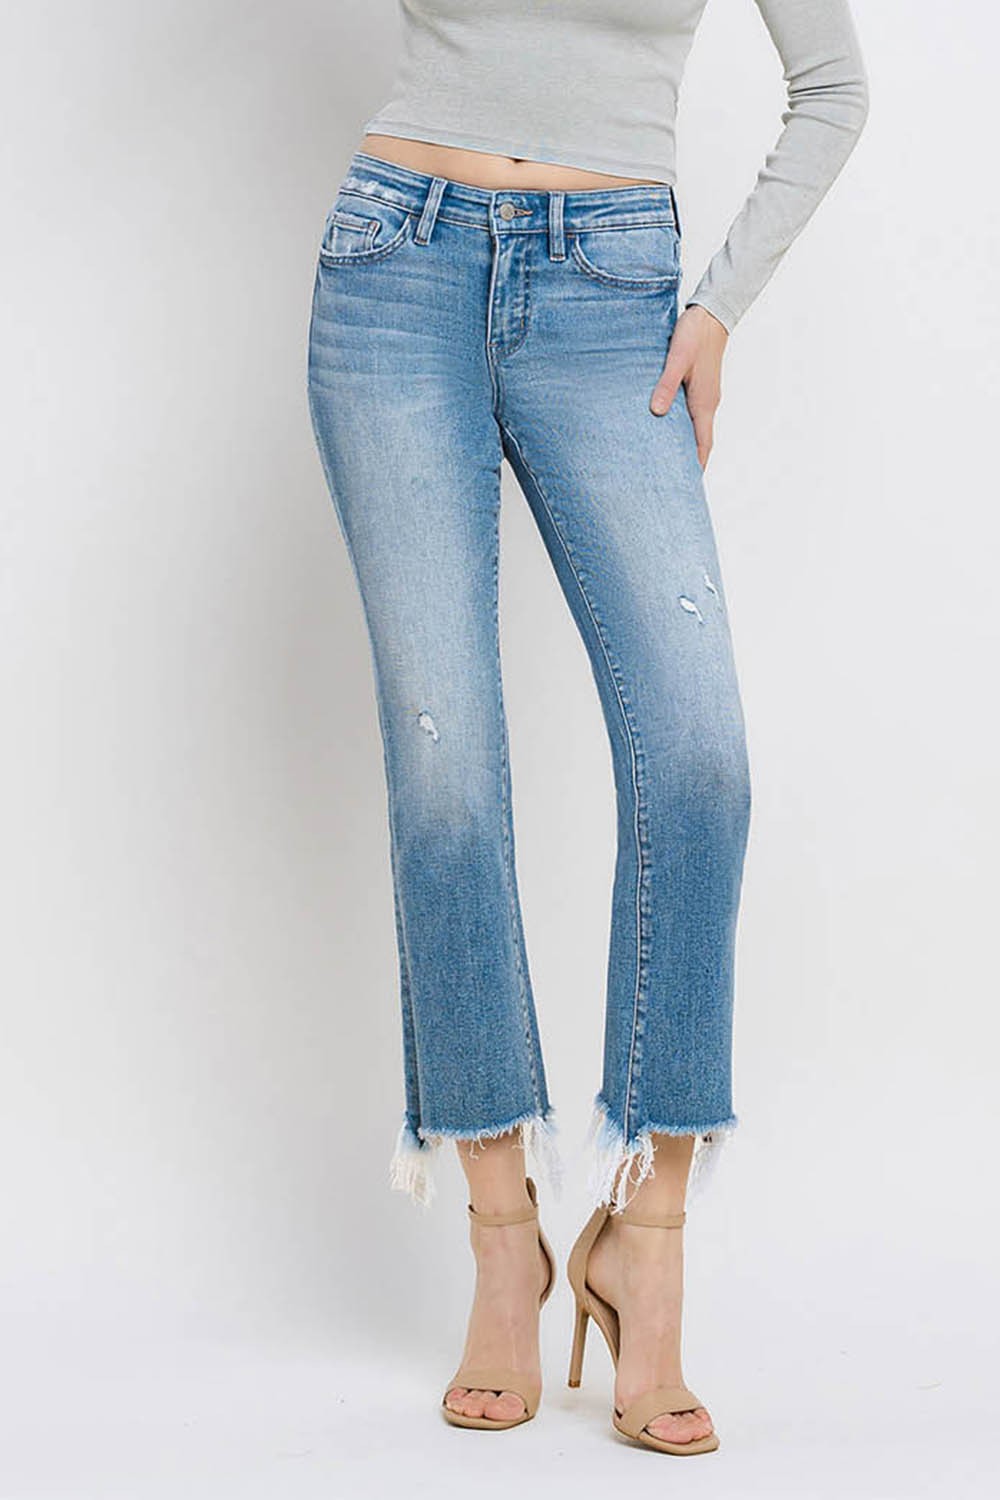 Midrise Distressed Hem Jeans - KC Outfitter